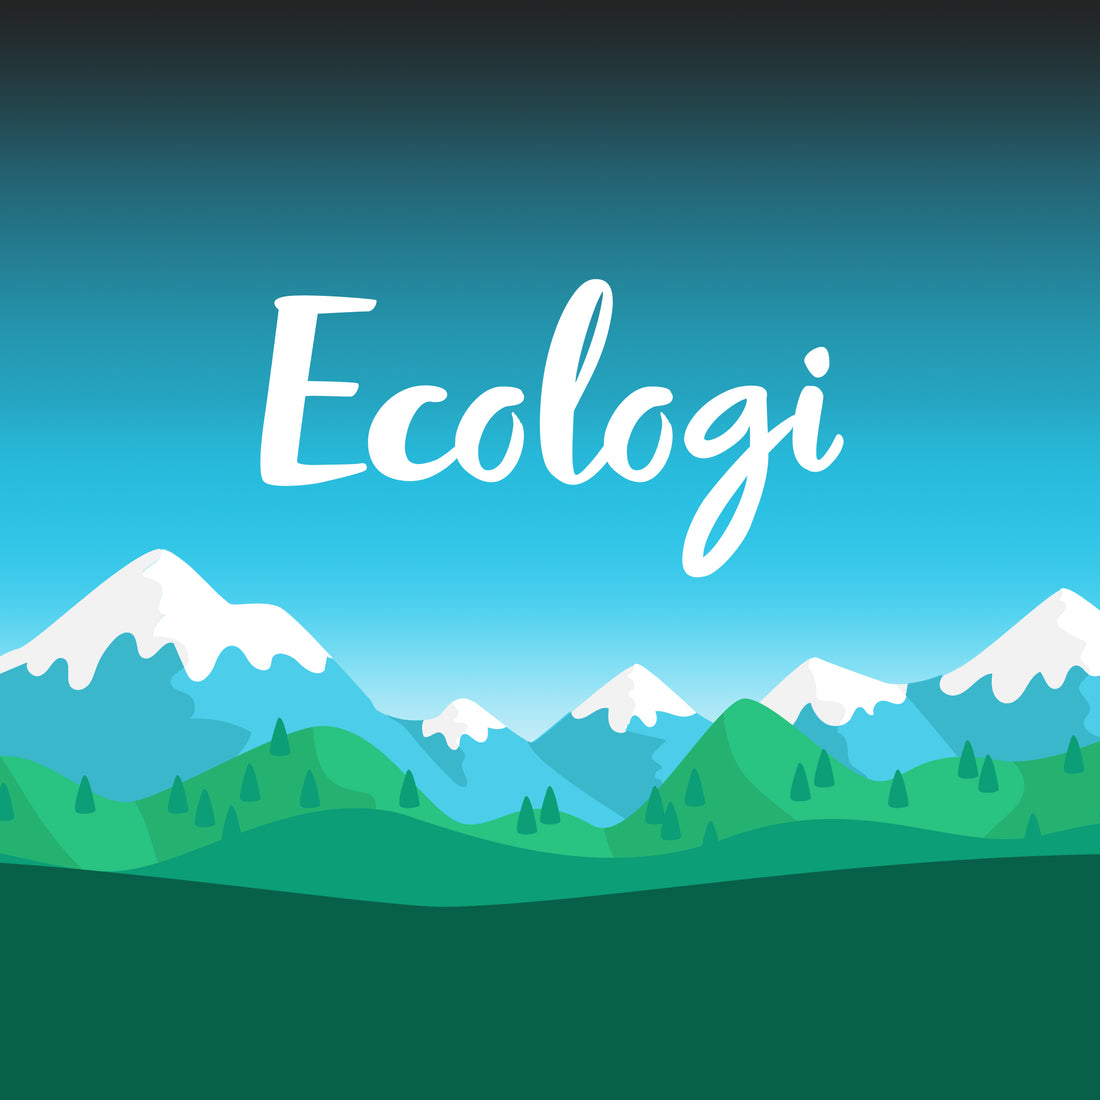 Counting Planted Trees With Ecologi: It's Not as Difficult as You Think